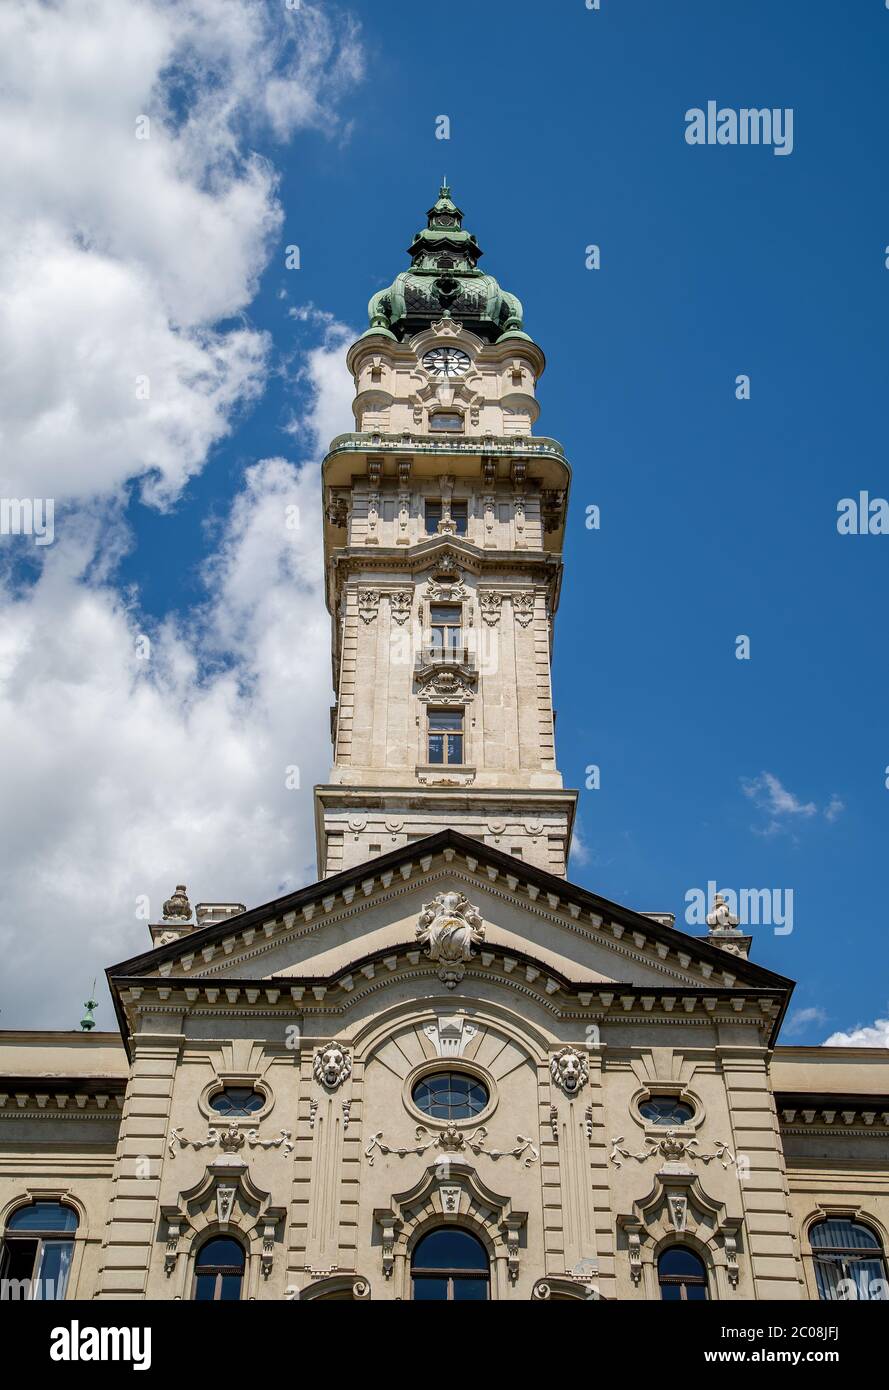 Detail of the back front of City Hall of Gyor. Hungary. The eclectic style building was completed in 1900.The 59-meter clock tower. Stock Photo